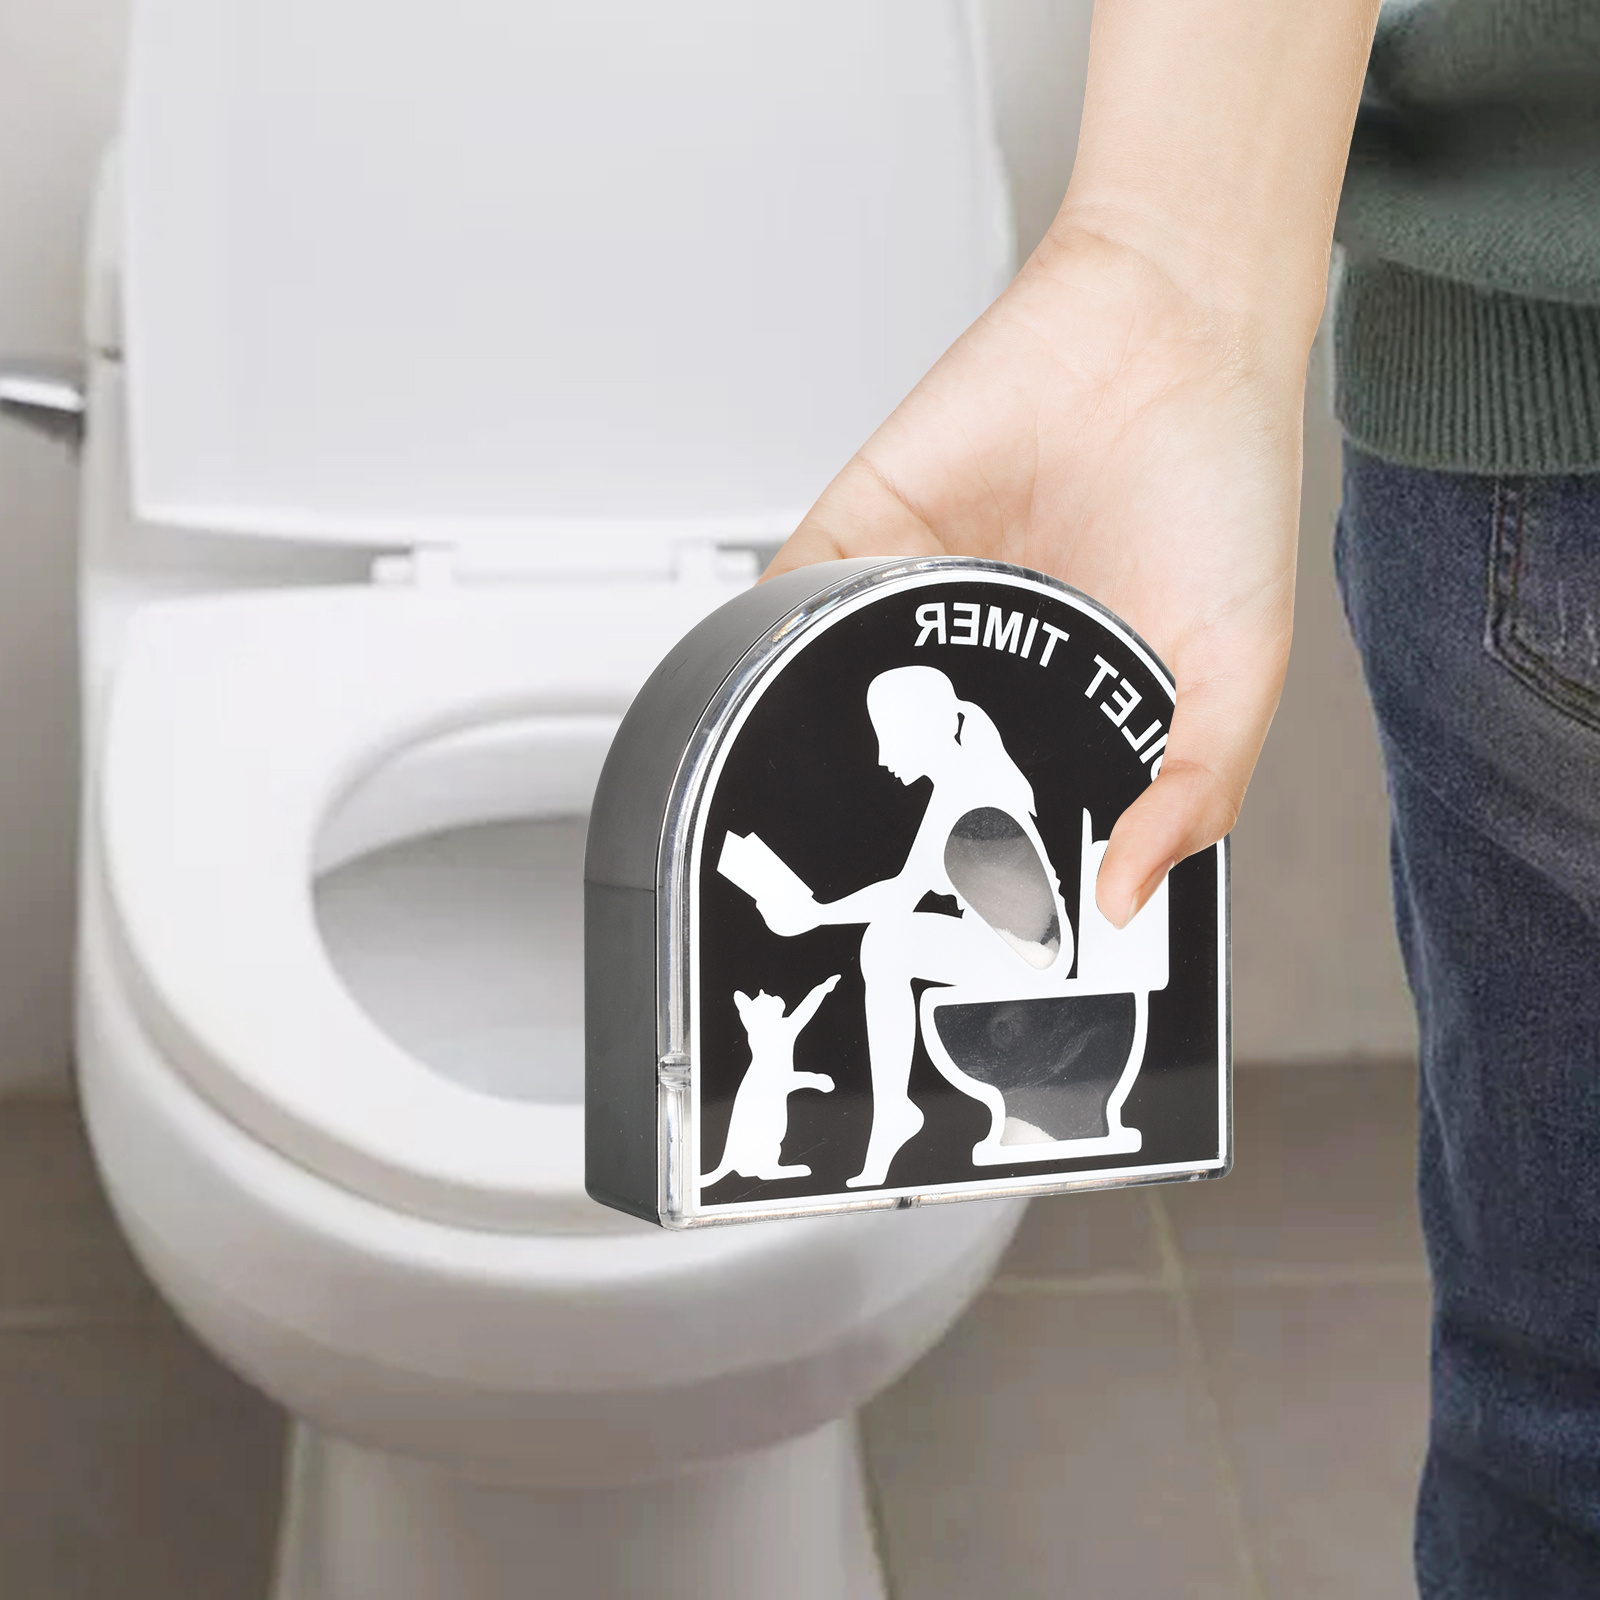 Does your partner need this 'Toilet Timer'? This gift is going